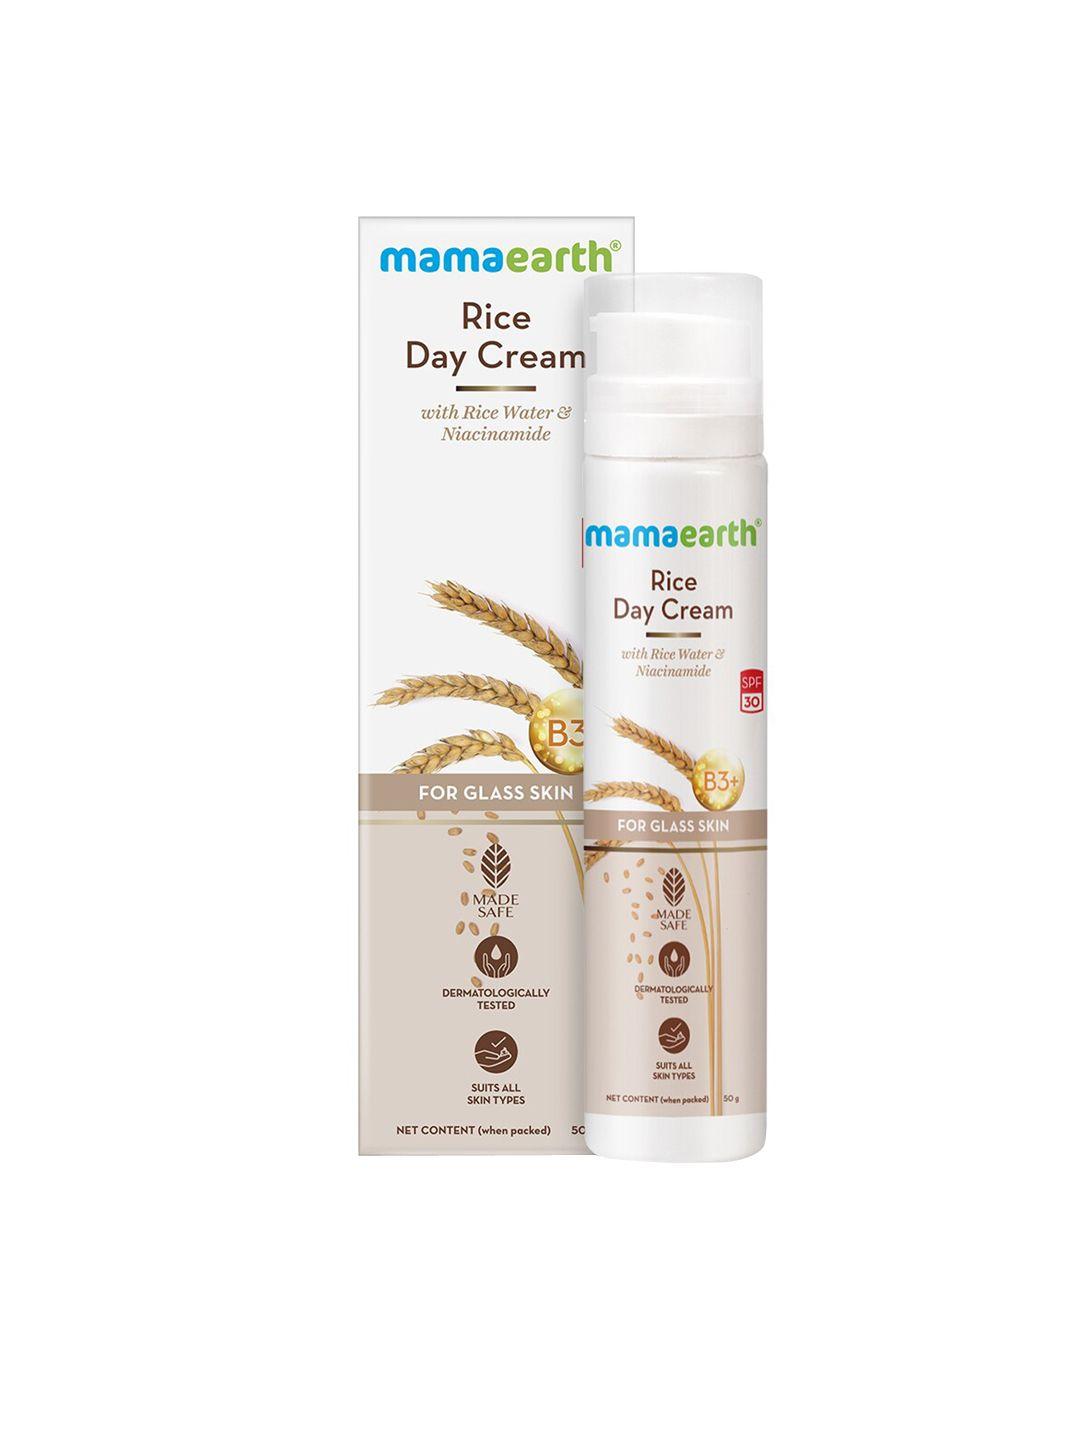 mamaearth rice spf 30 day cream with rice water & niacinamide for glass skin - 50 g